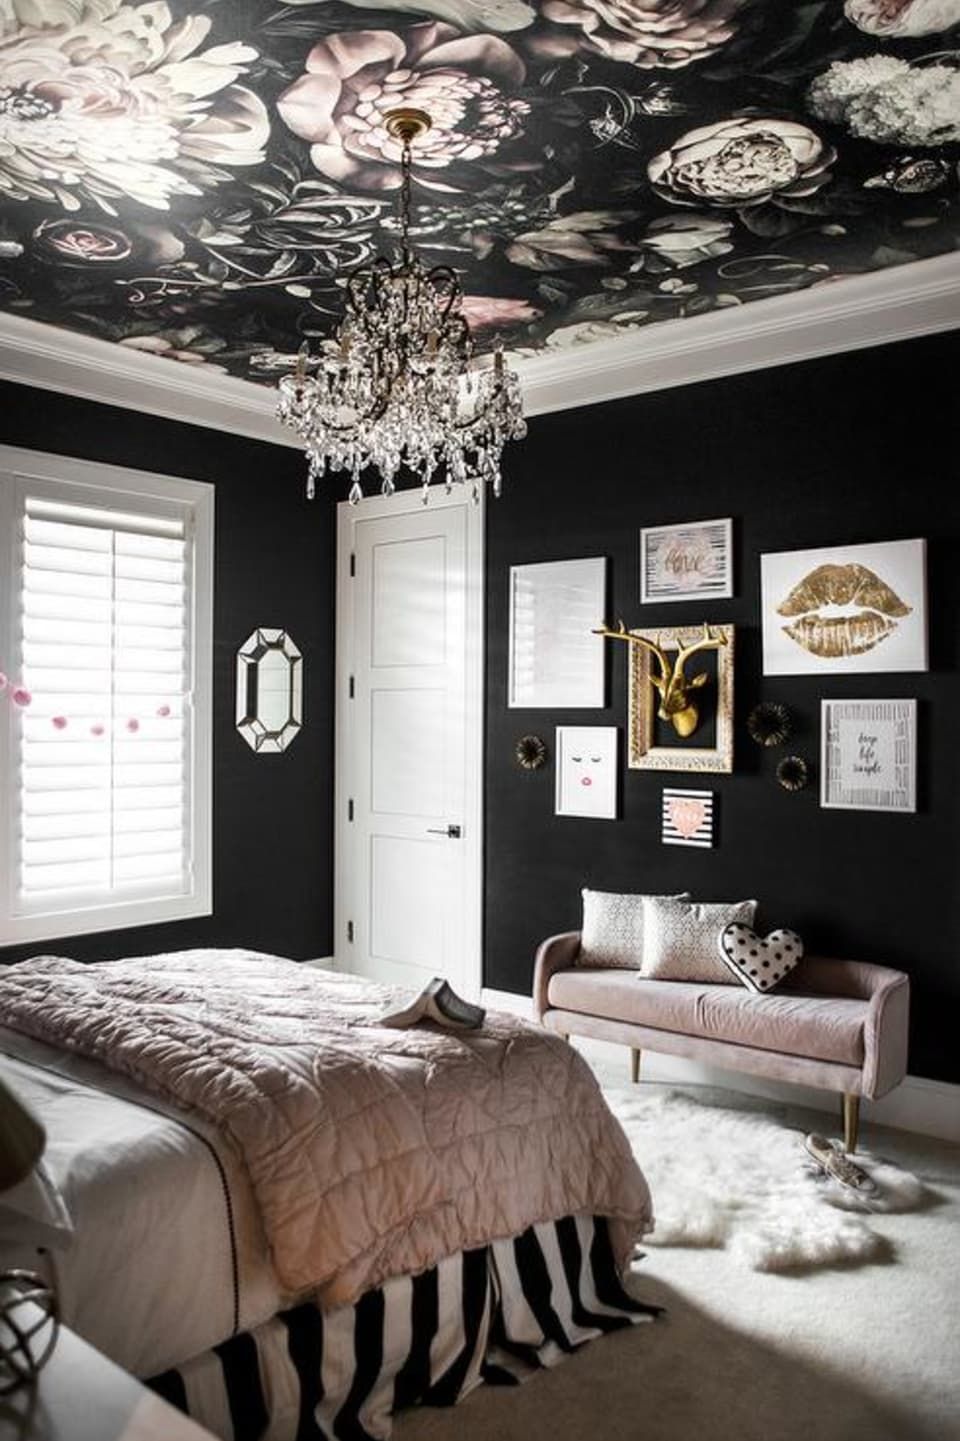 16 Beautiful Rooms That Prove Black Walls Are Totally Accessible - 16 Beautiful Rooms That Prove Black Walls Are Totally Accessible -   16 black beauty Room ideas